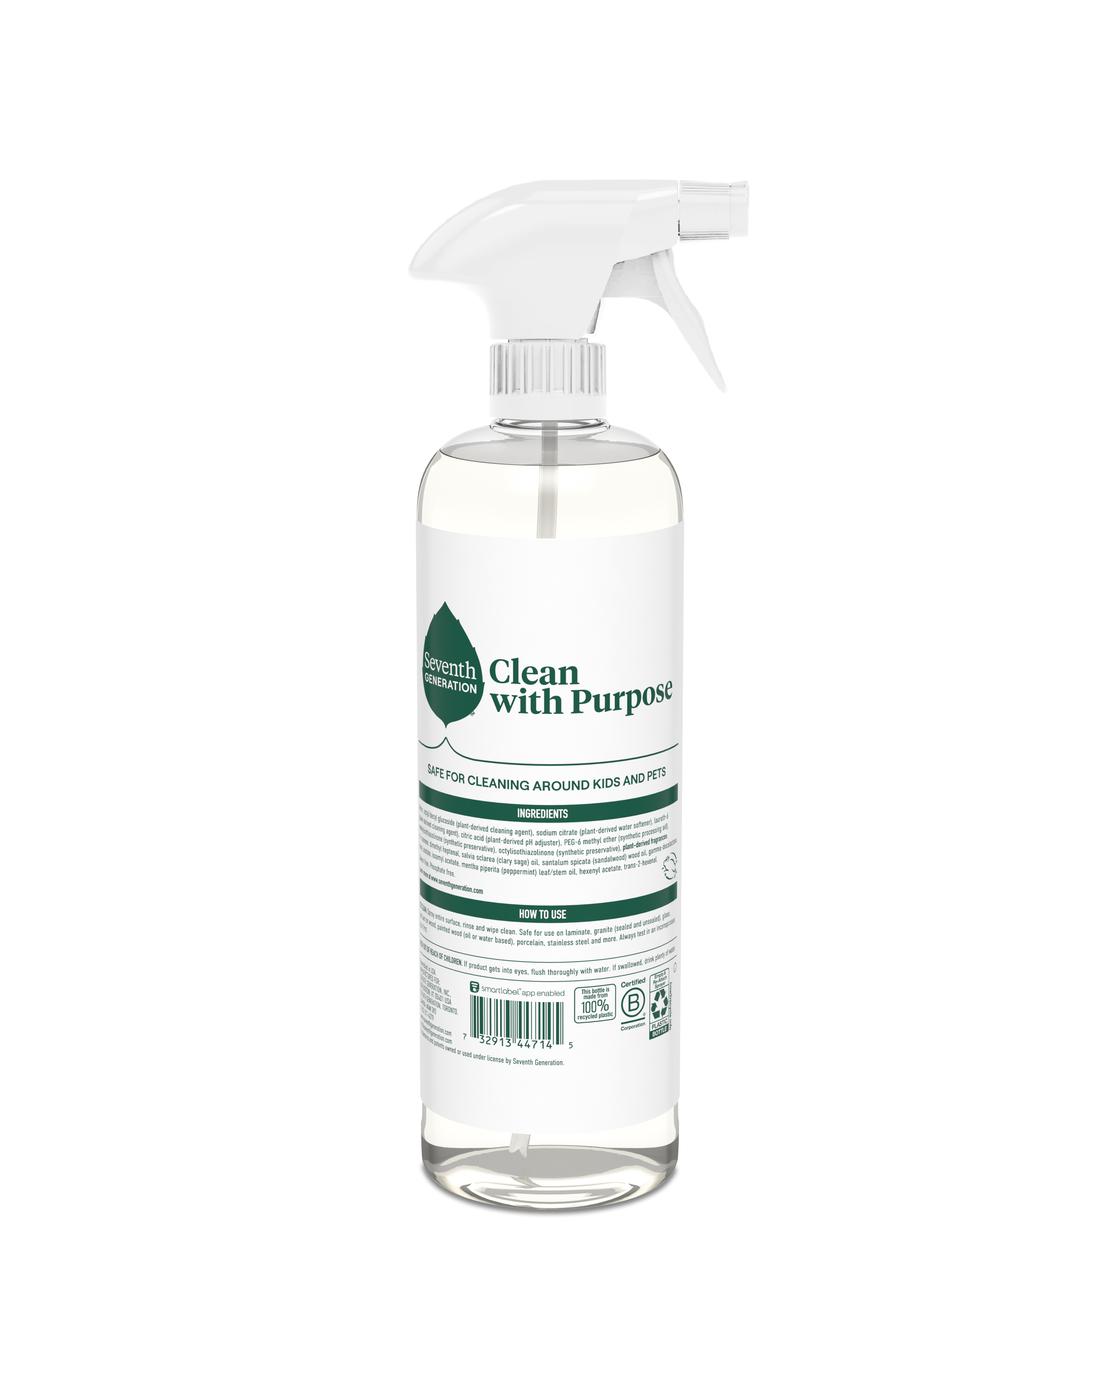 Seventh Generation Fresh Morning Meadow All Purpose Cleaner; image 4 of 4